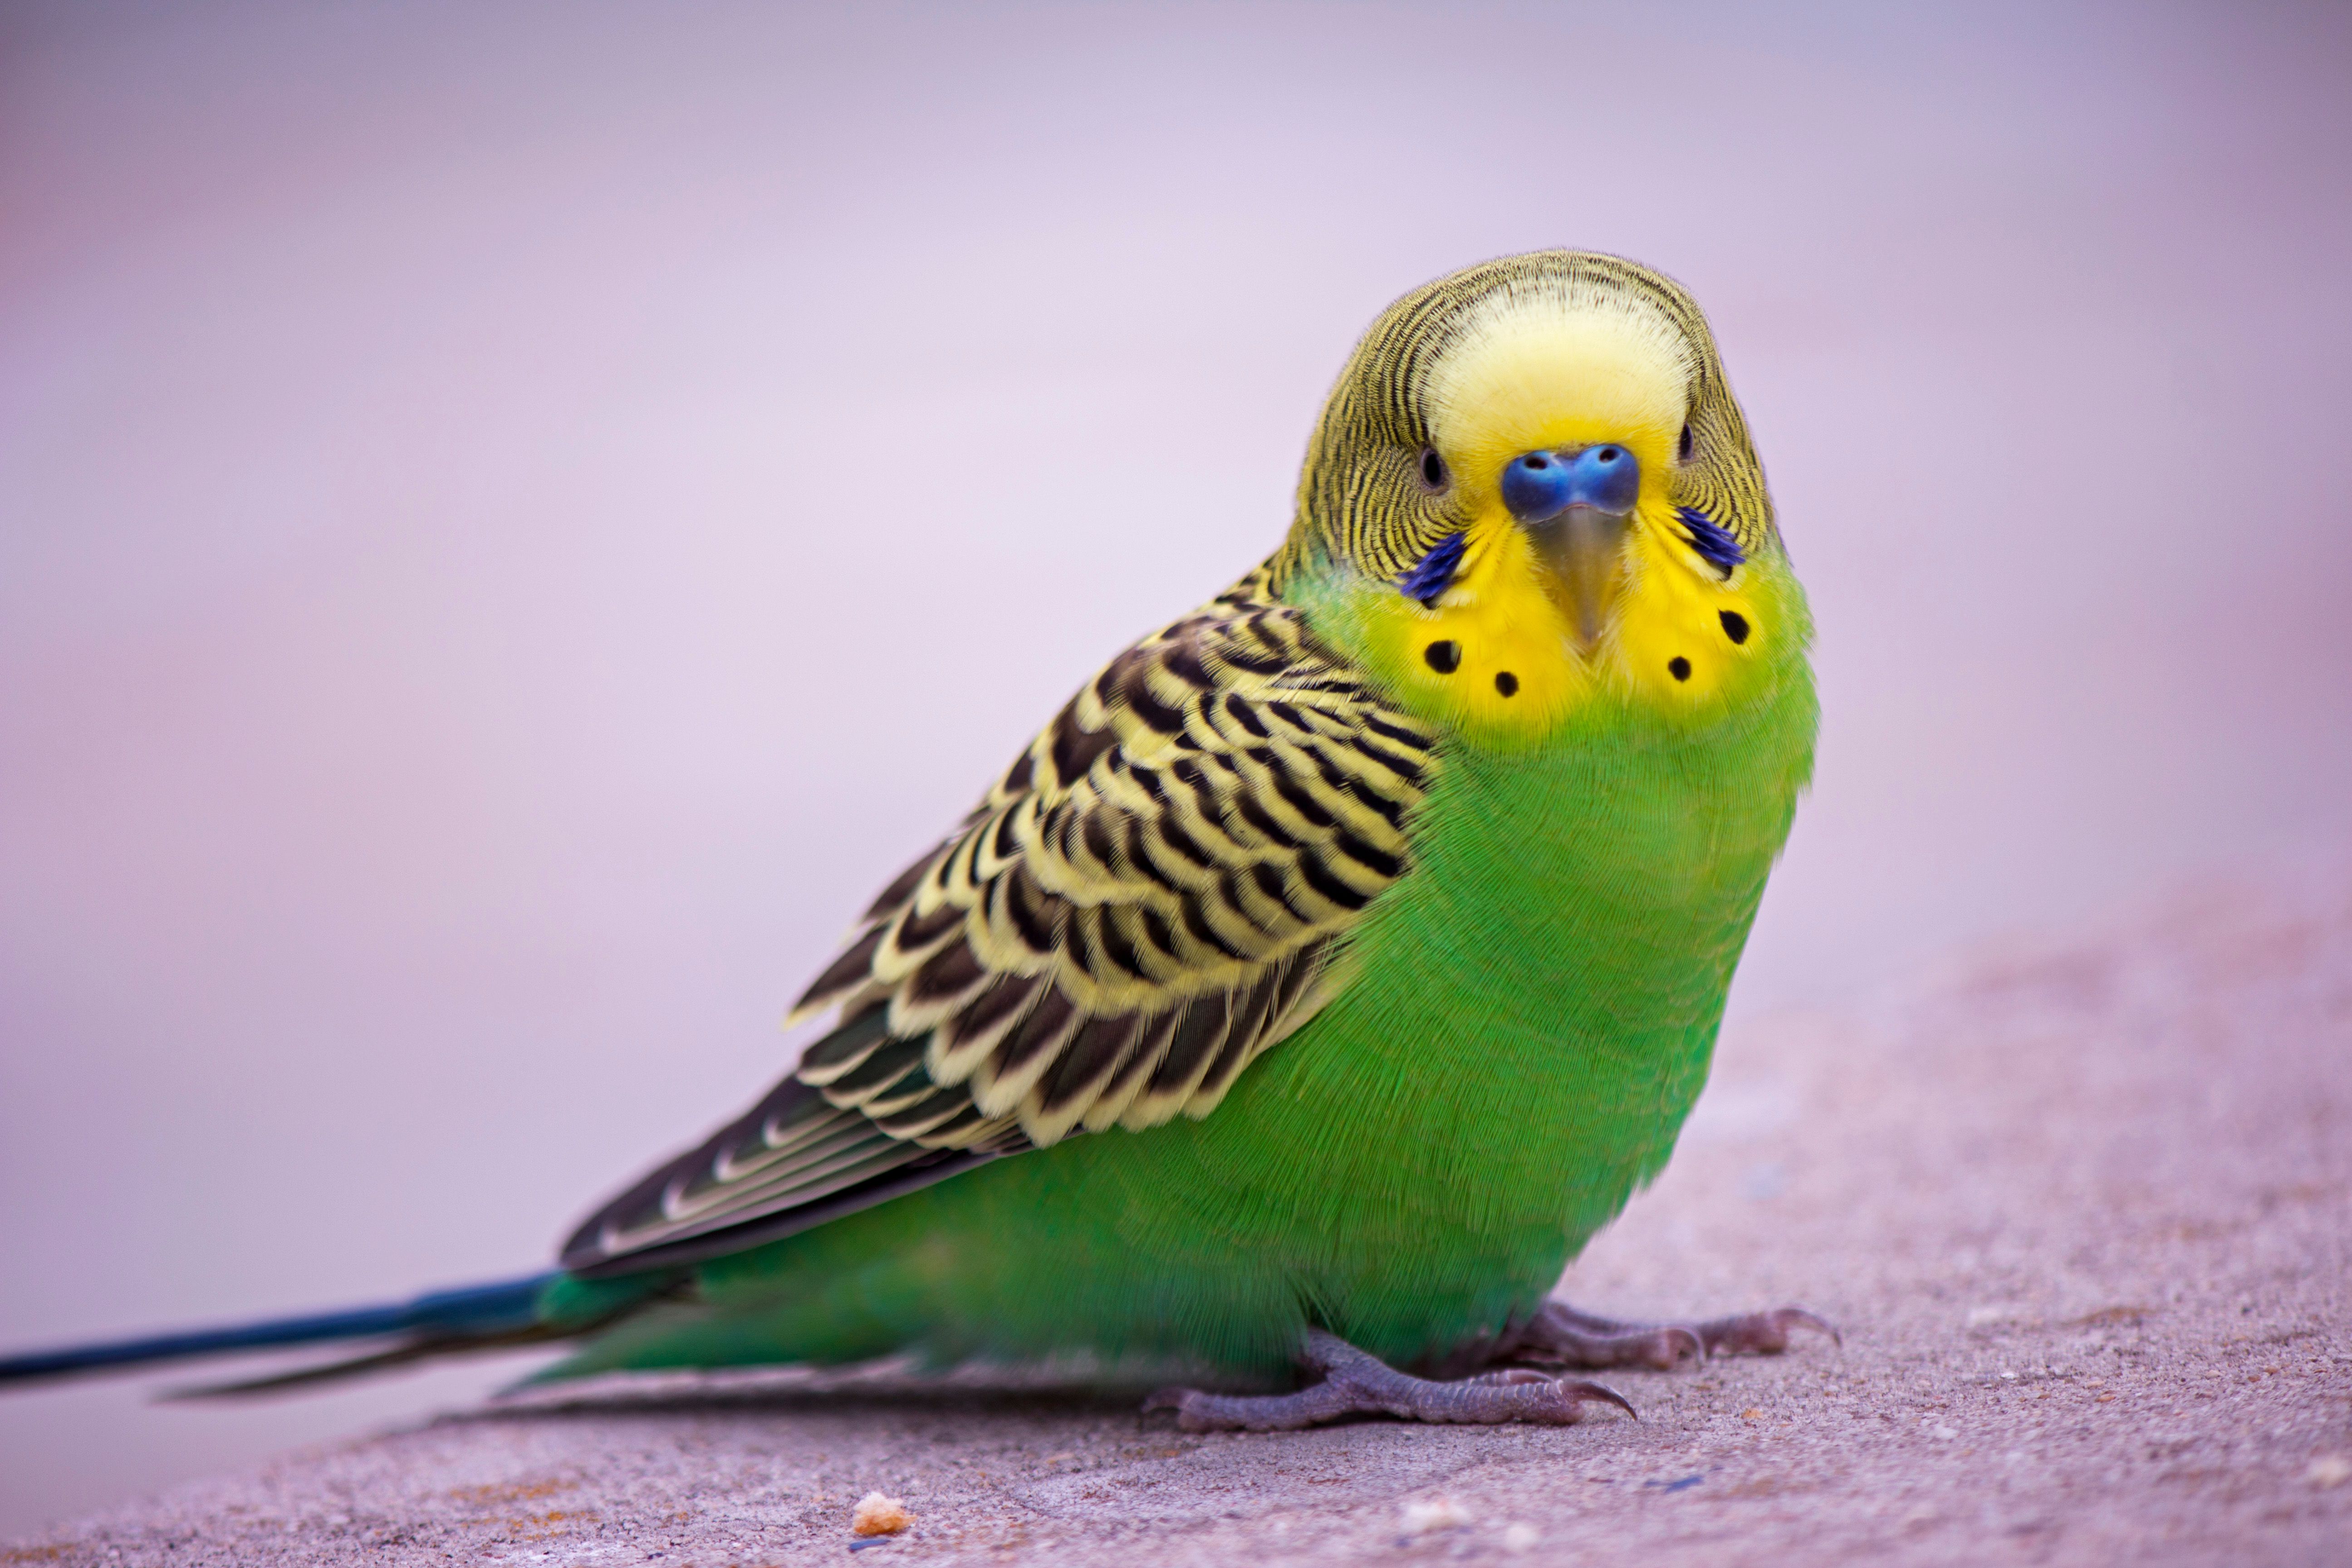 Green budgie sitting on the floor